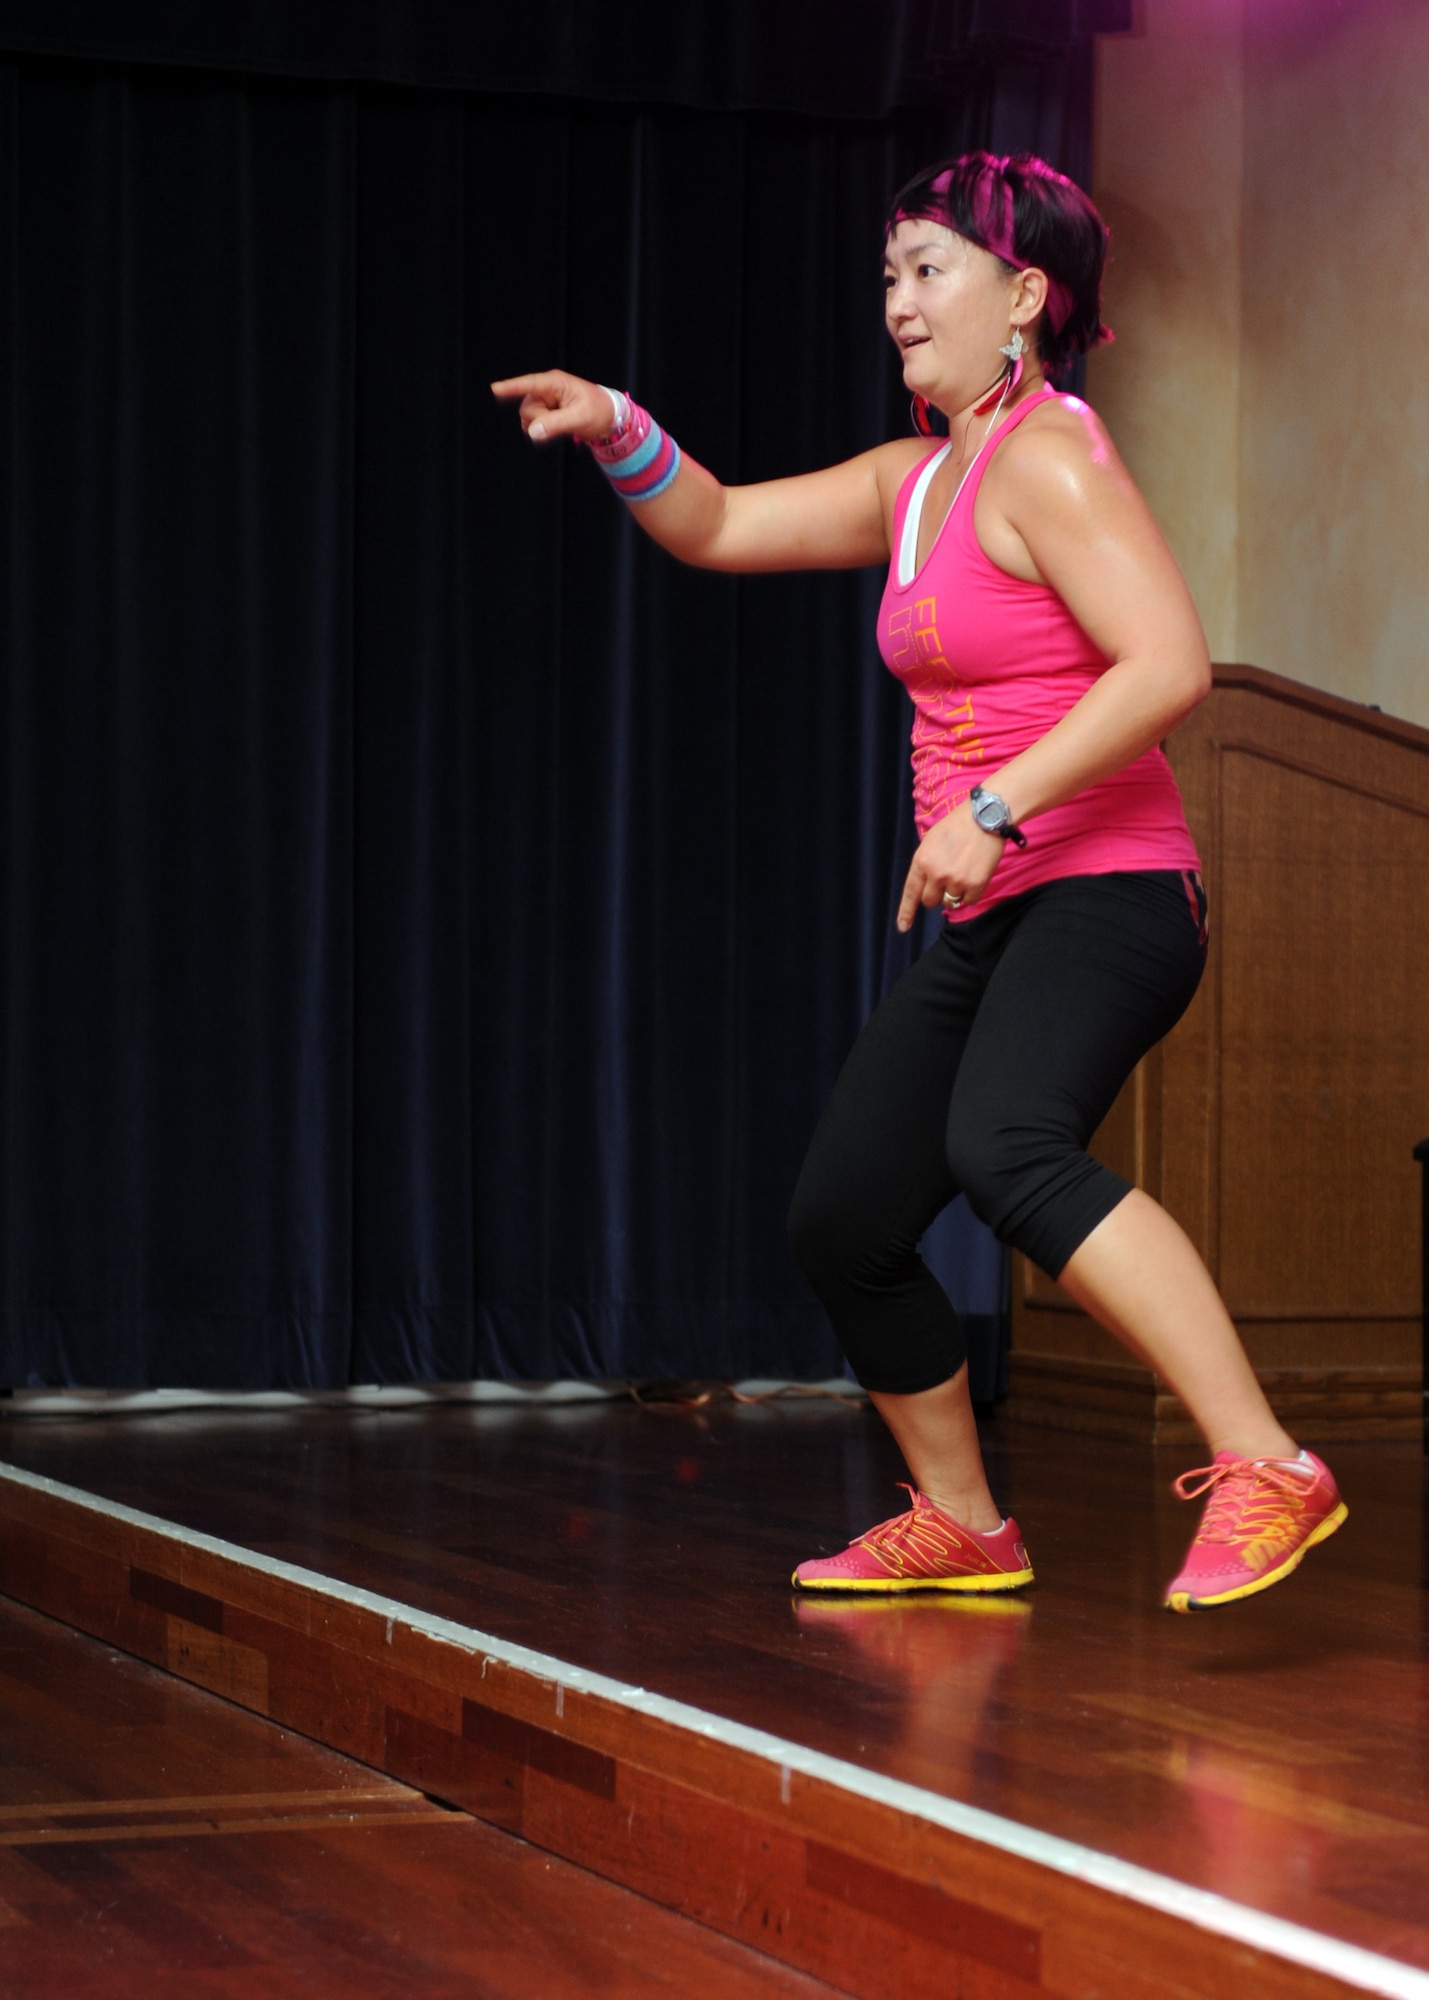 SPANGDAHLEM AIR BASE, Germany – Kim Groder, wife of Master Sgt. Michael Groder, 52nd Security Forces Squadron, leads the more than 130 participants during a dance at the Zumba for a Cure event in support of Breast Cancer Awareness Month here Oct. 13. Zumba for a Cure raised more than $2,000 toward the Susan G. Komen Foundation for Breast Cancer Research. (U.S. Air Force photo/Senior Airman Christopher Toon)